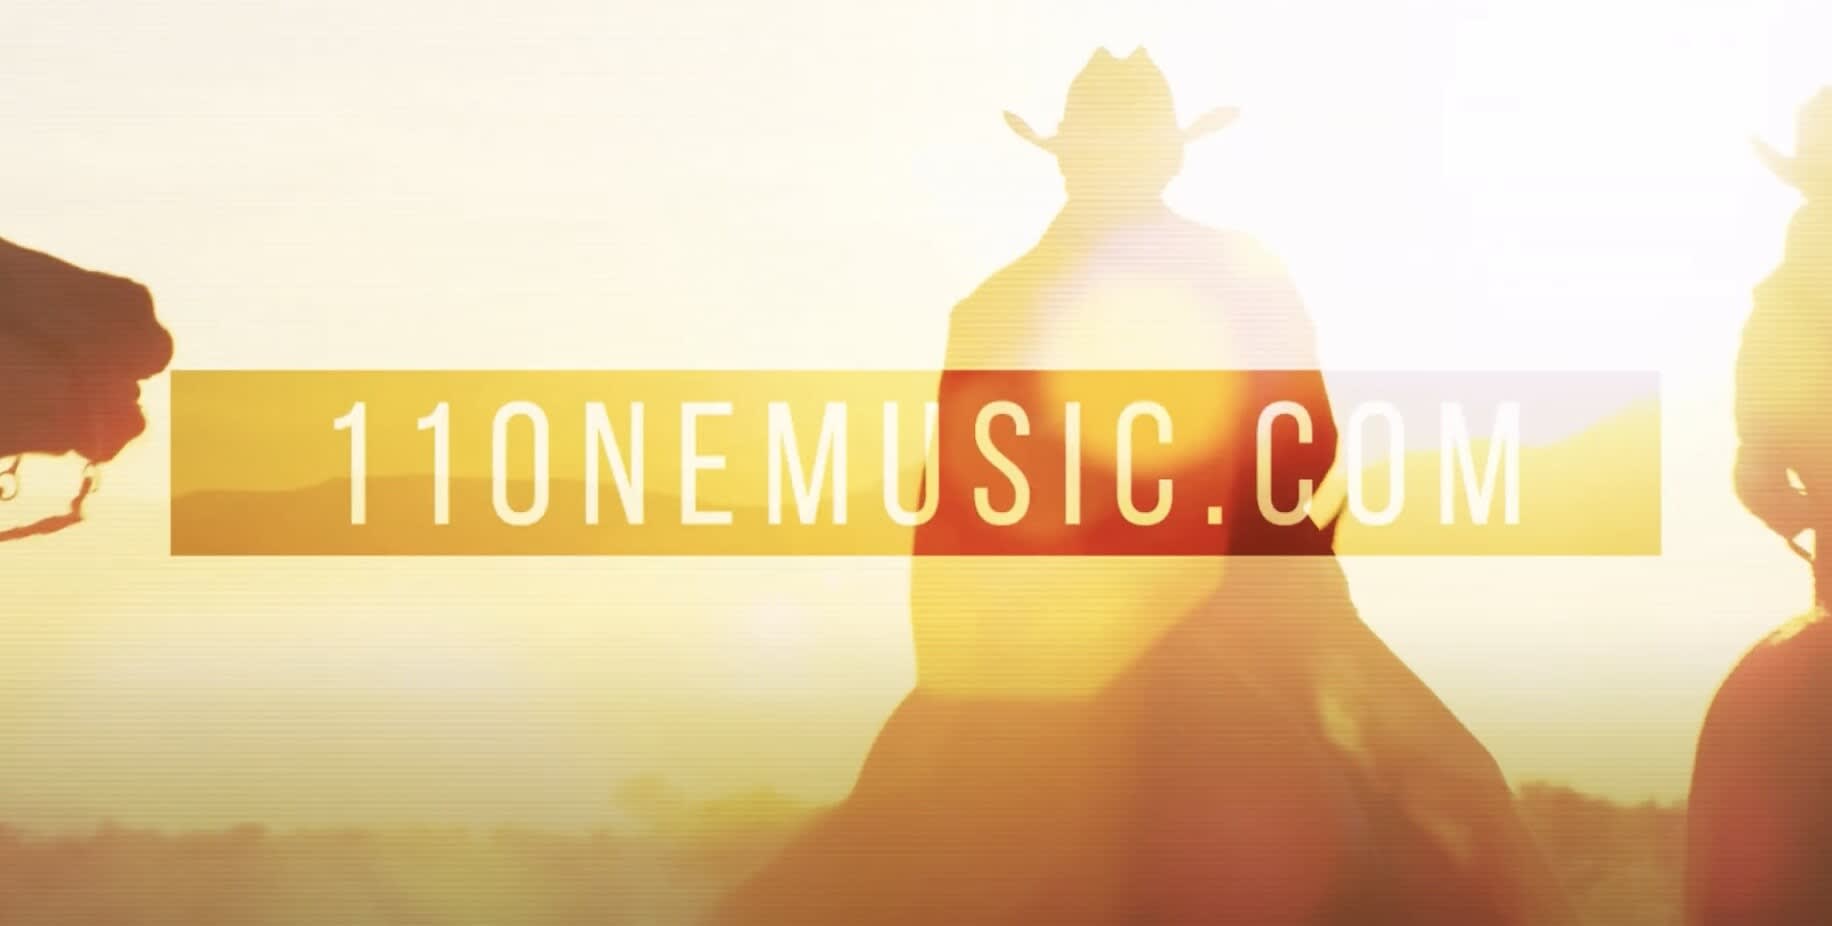 New 11 One/Music Hero video featuring JCD Creative&#8217;s animation!